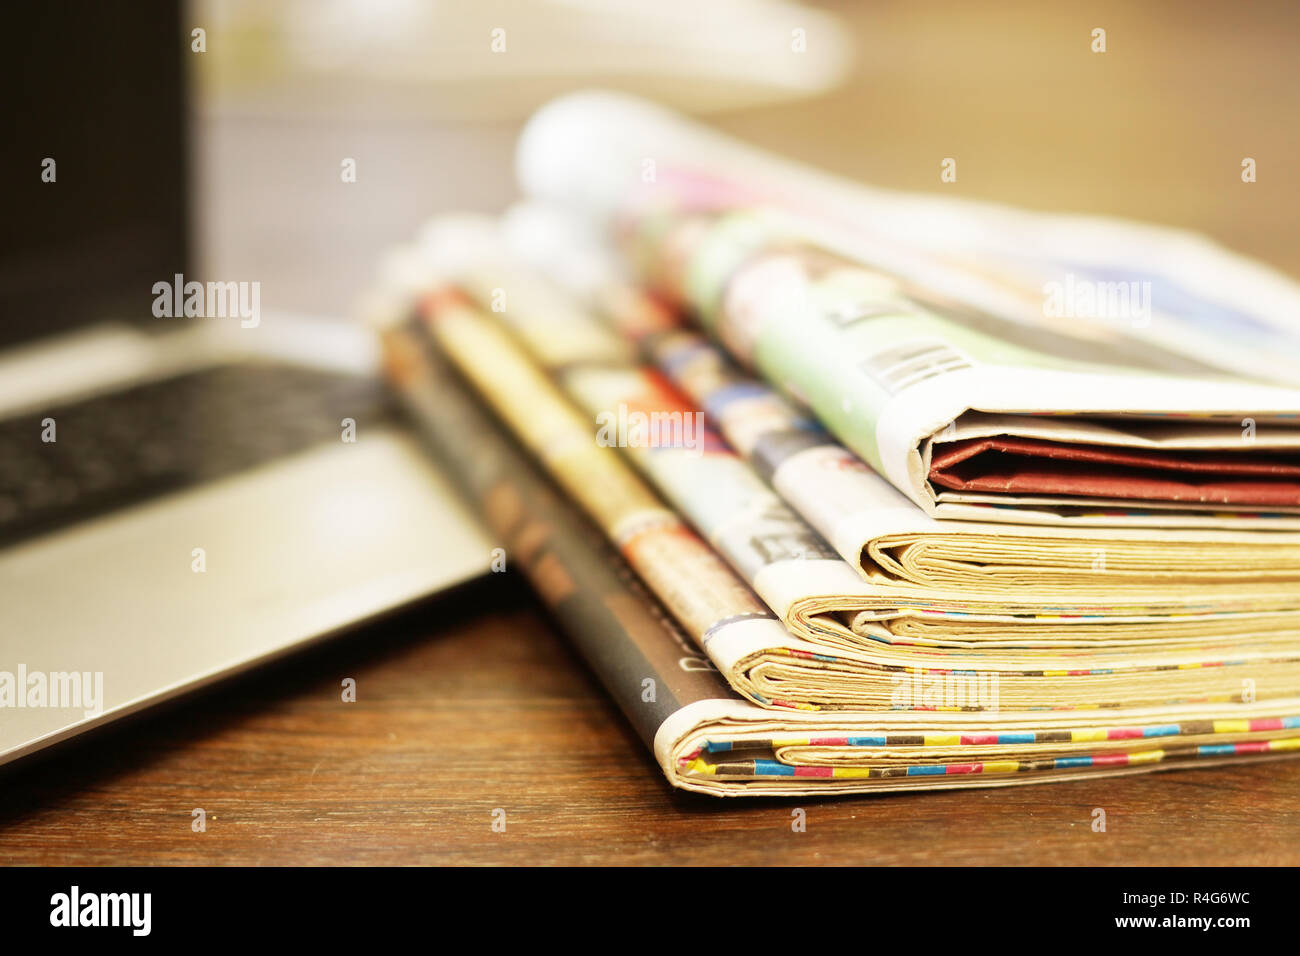 Newspapers and laptop. Pile of daily papers with news on computer. Pages with headlines, articles folded and stacked on keypad of electronic device Stock Photo